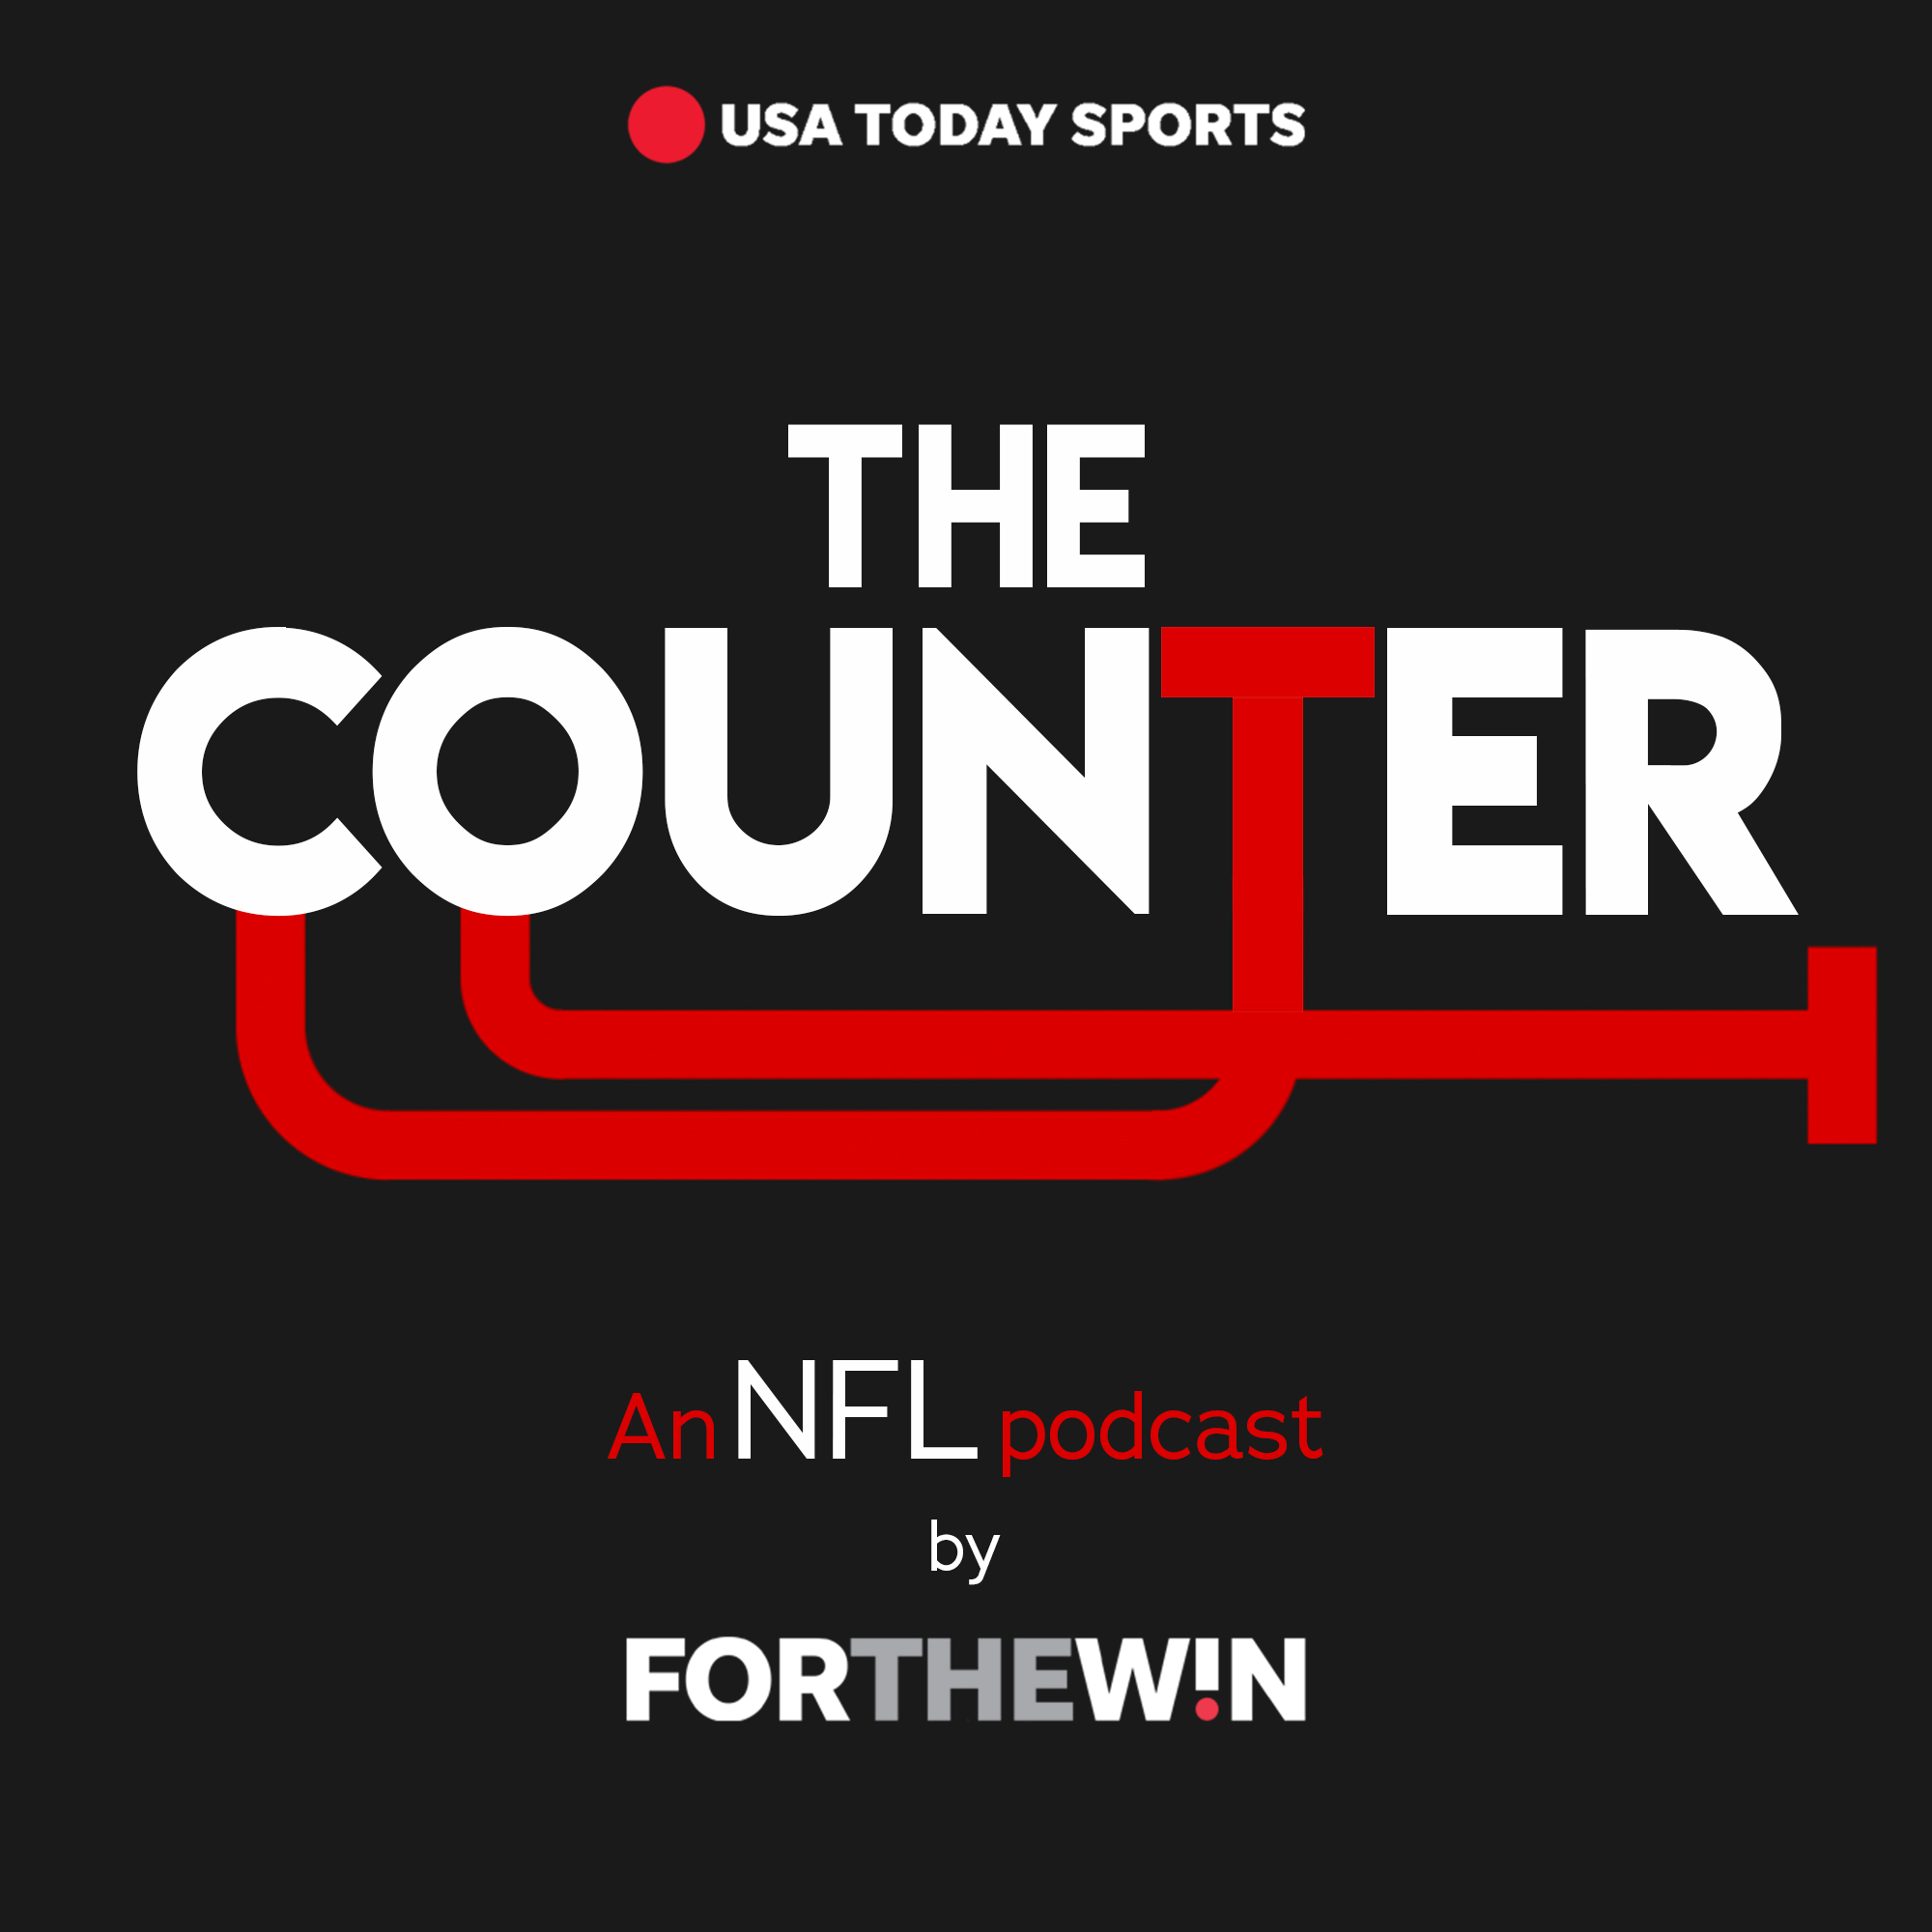 The Counter: An NFL Podcast by For The Win - Divisional round review, Coaching news, and what we're expecting to see on Championship weekend